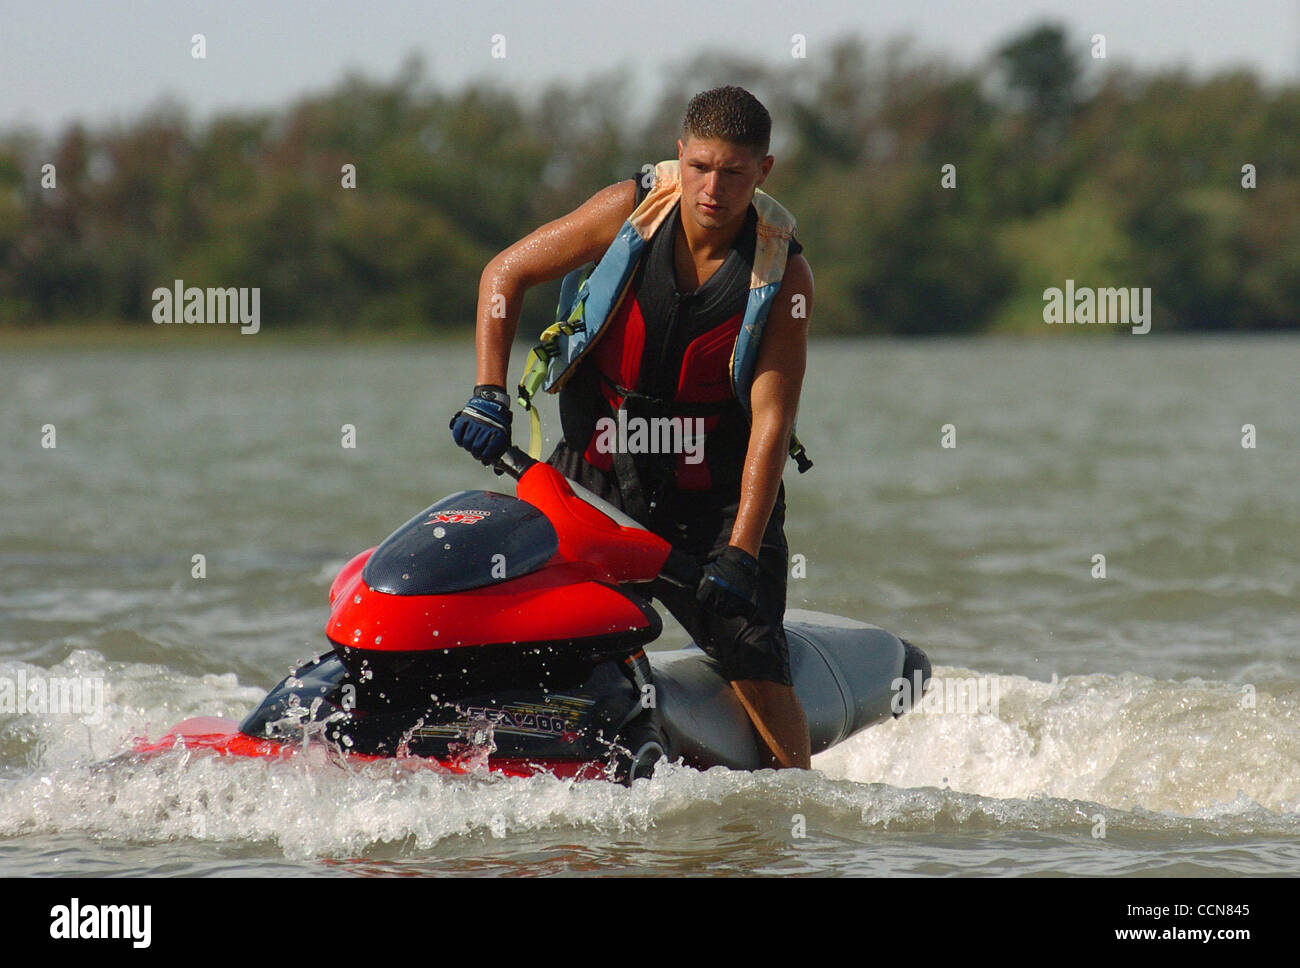 4:25 pm - A.J. Garcia, age 20, from Antioch, rides his wave runner towards the Antioch Boat Ramp while enjoying an afternoon of fun on the San Joaquin River on Thursday, August 19, 2004 in Antioch, Calif. (Jose Carlos Fajardo/Contra Costa Times) Stock Photo